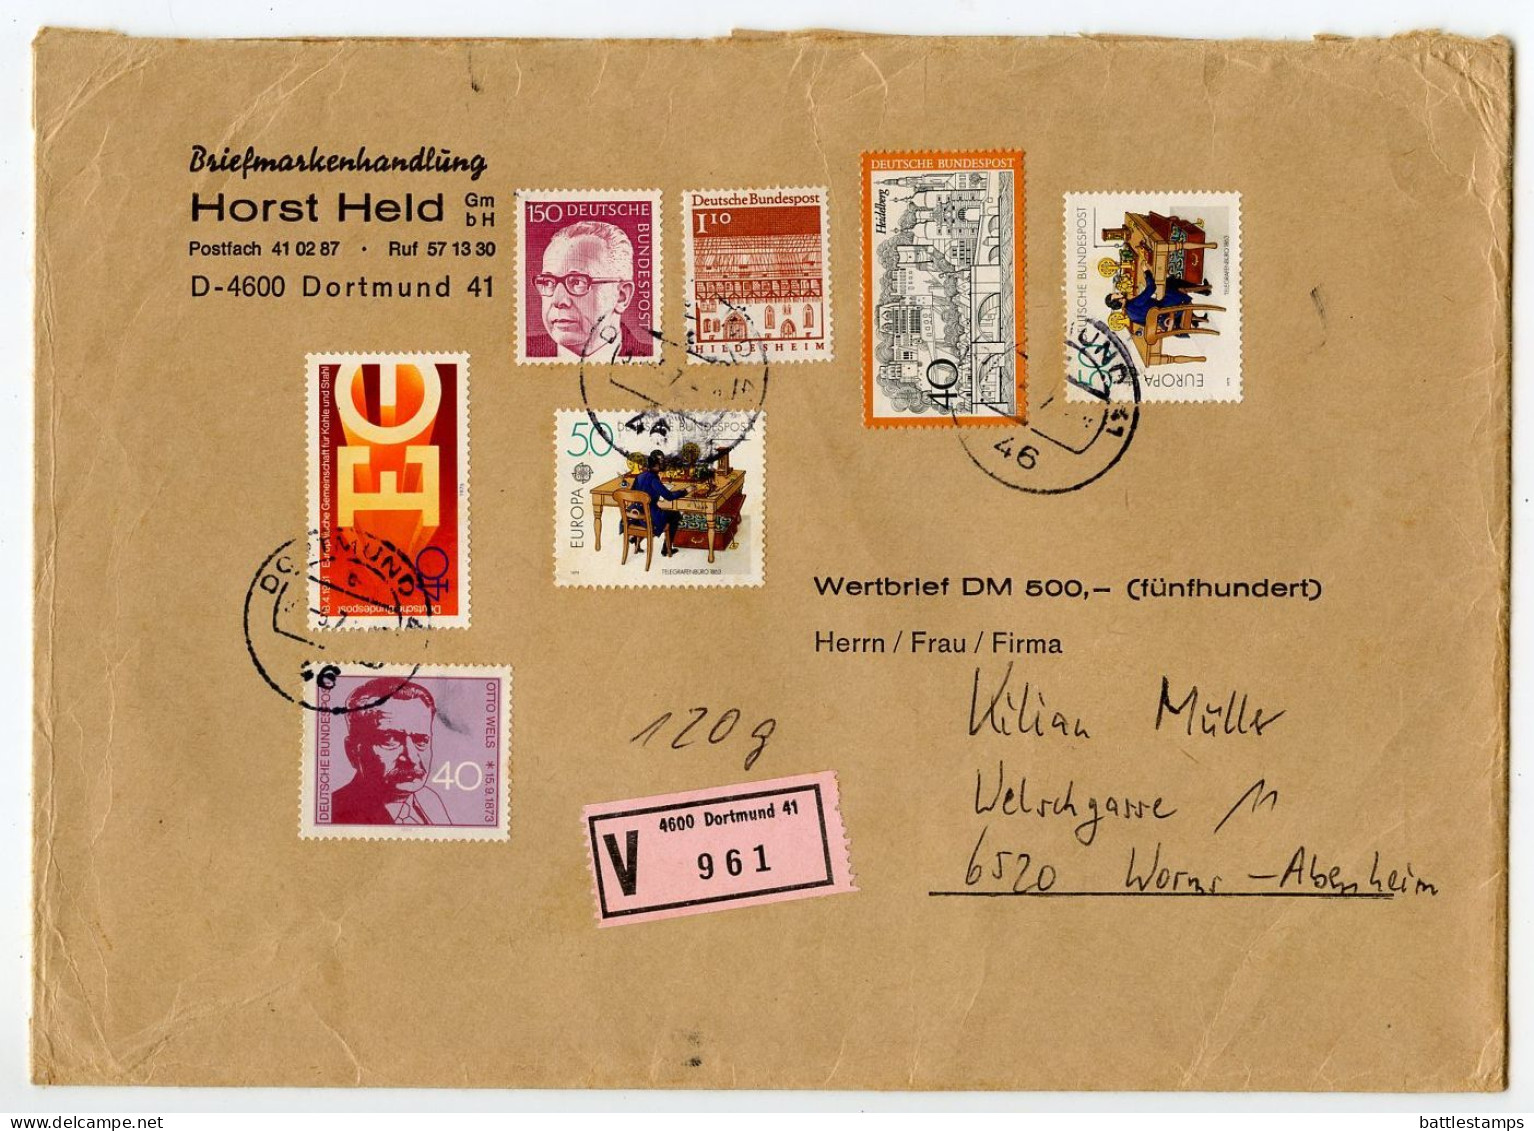 Germany, West 1979 Insured V-Label Cover; Dortmund To Worms-Abenheim; Mix Of Stamps - Brieven En Documenten